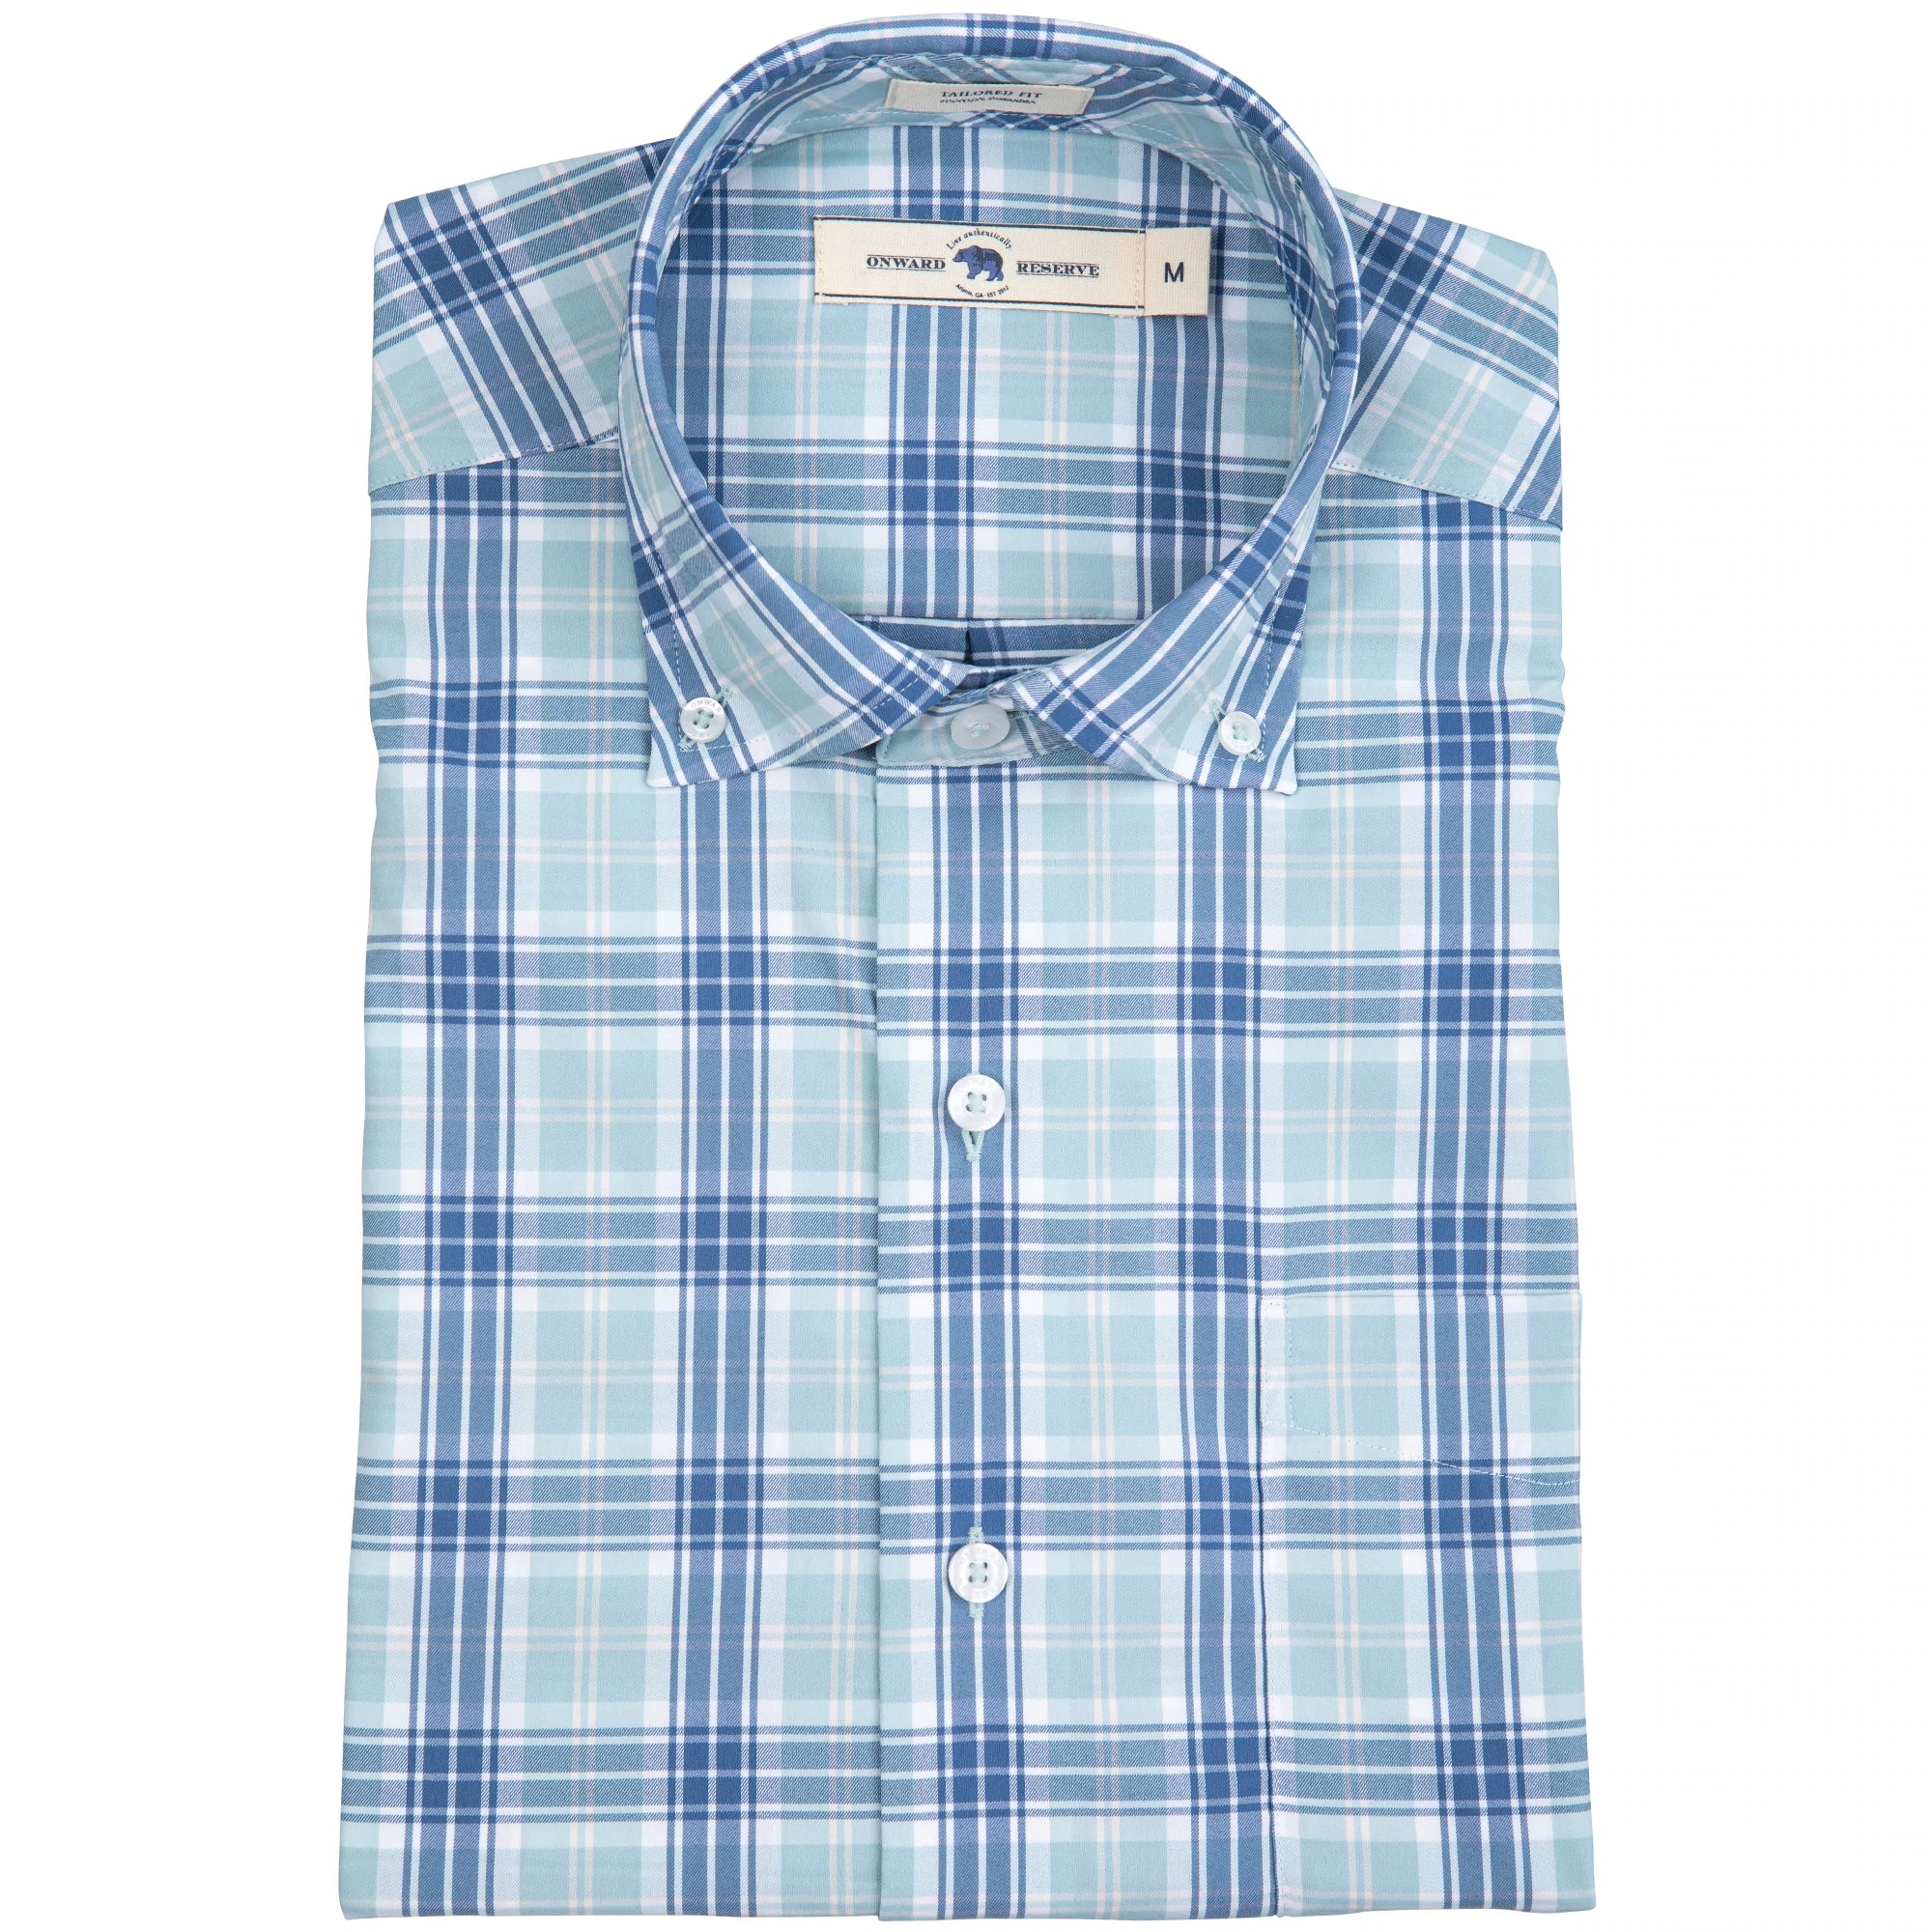 Onward Reserve Buttonwood Tailored Fit Performance Shirt